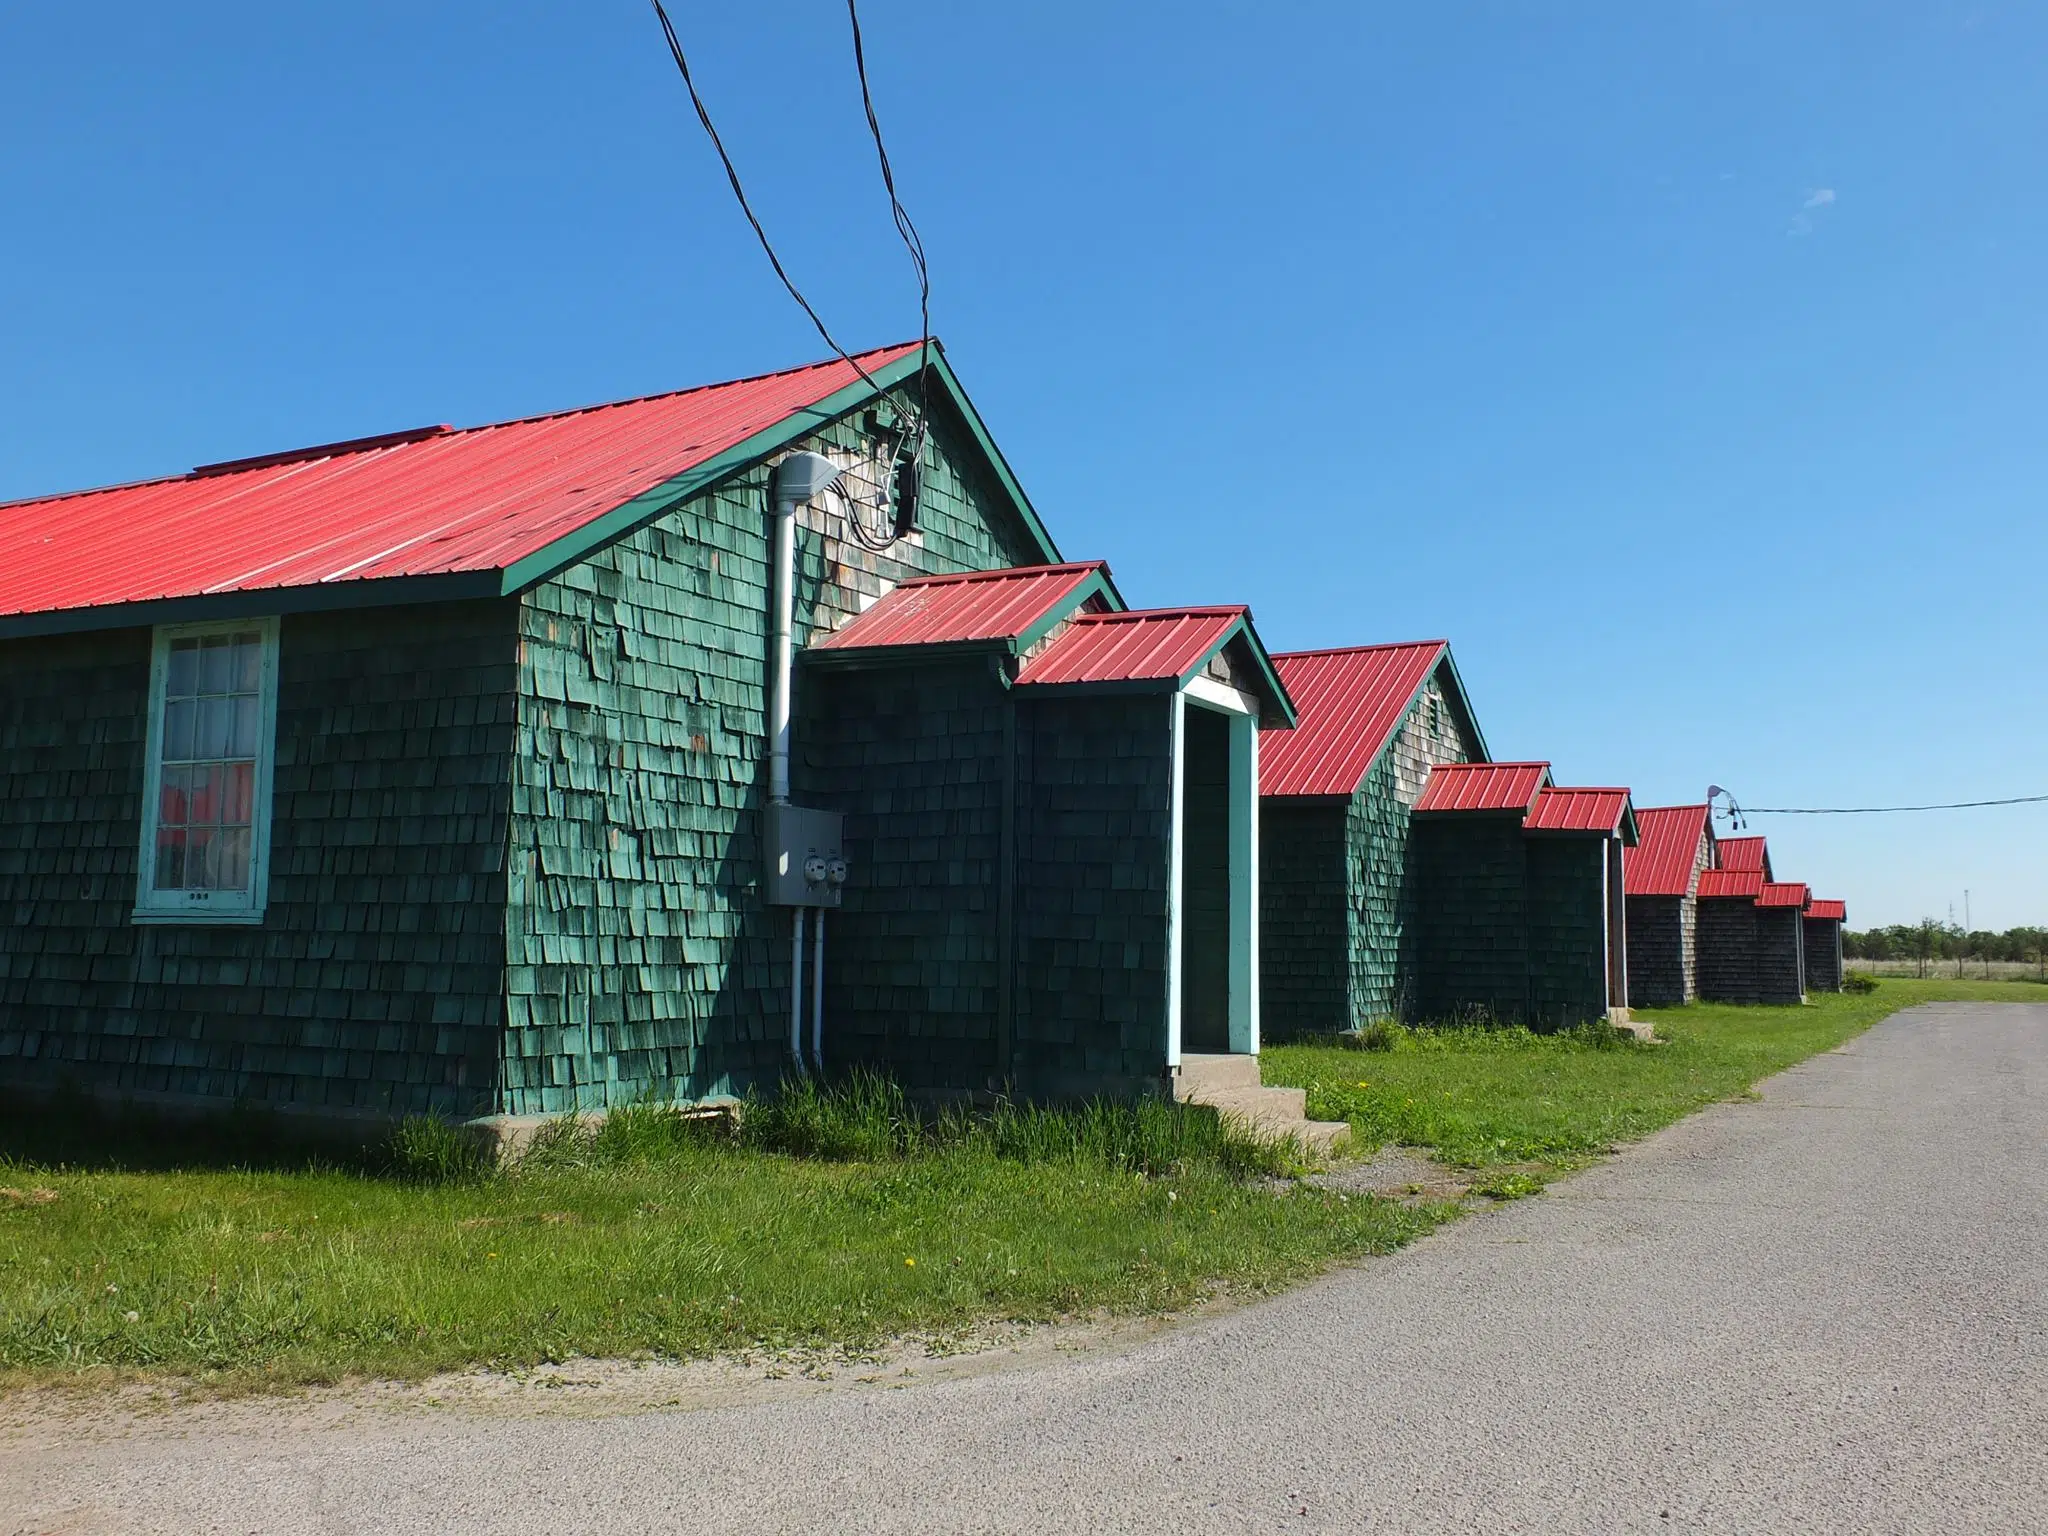 Author of book on Camp Picton hoping for preservation, museum with property up for sale